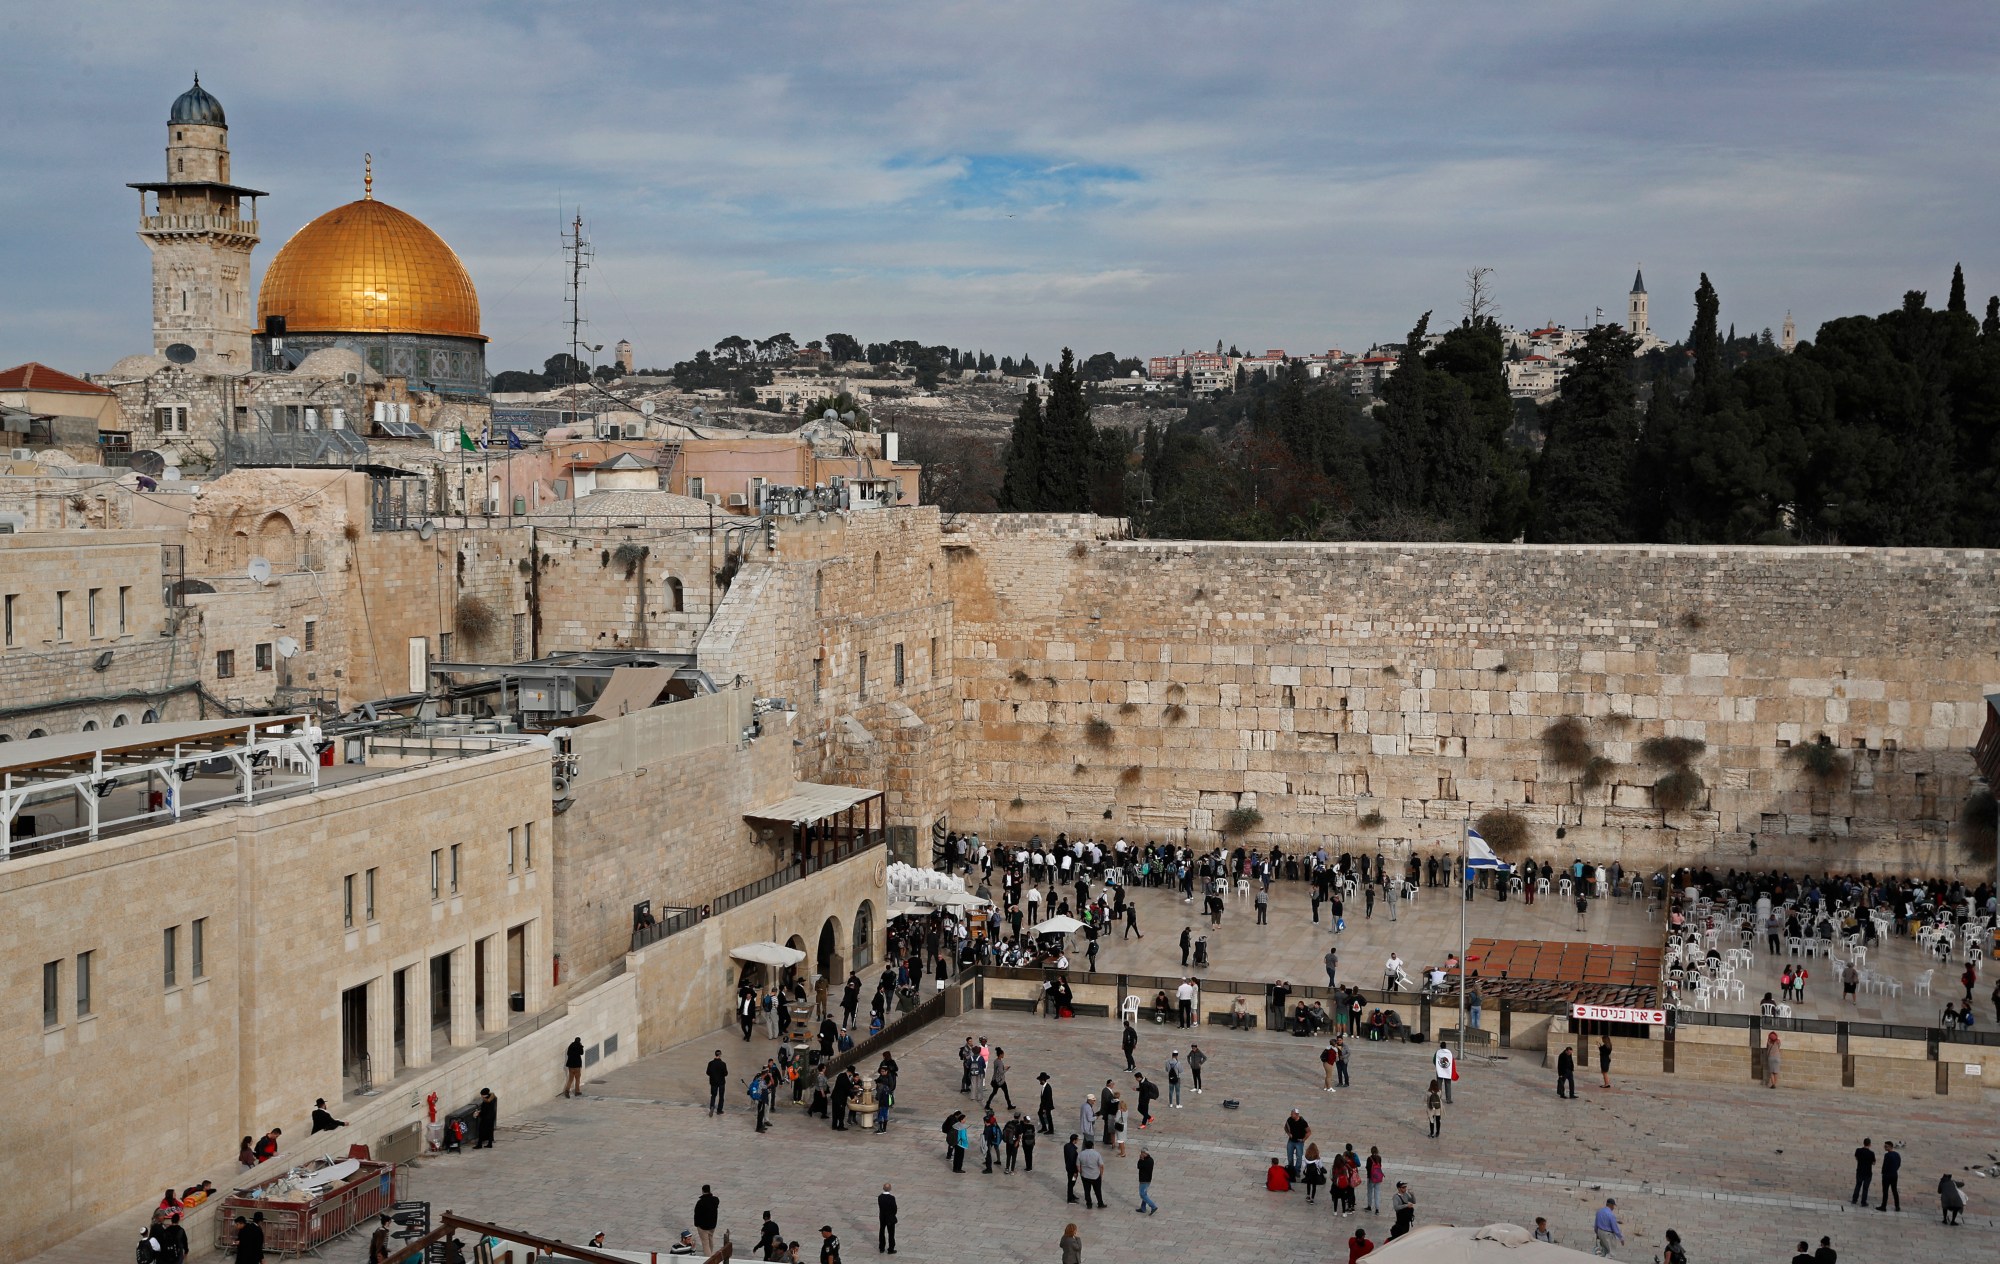 A general view shows the Western Wall plaza, where the Moroccan Quarter once stood, and the Dome of the Rock in the Al-Aqsa mosque compound in the Old City of Jerusalem on 5 December 2017 (AFP)